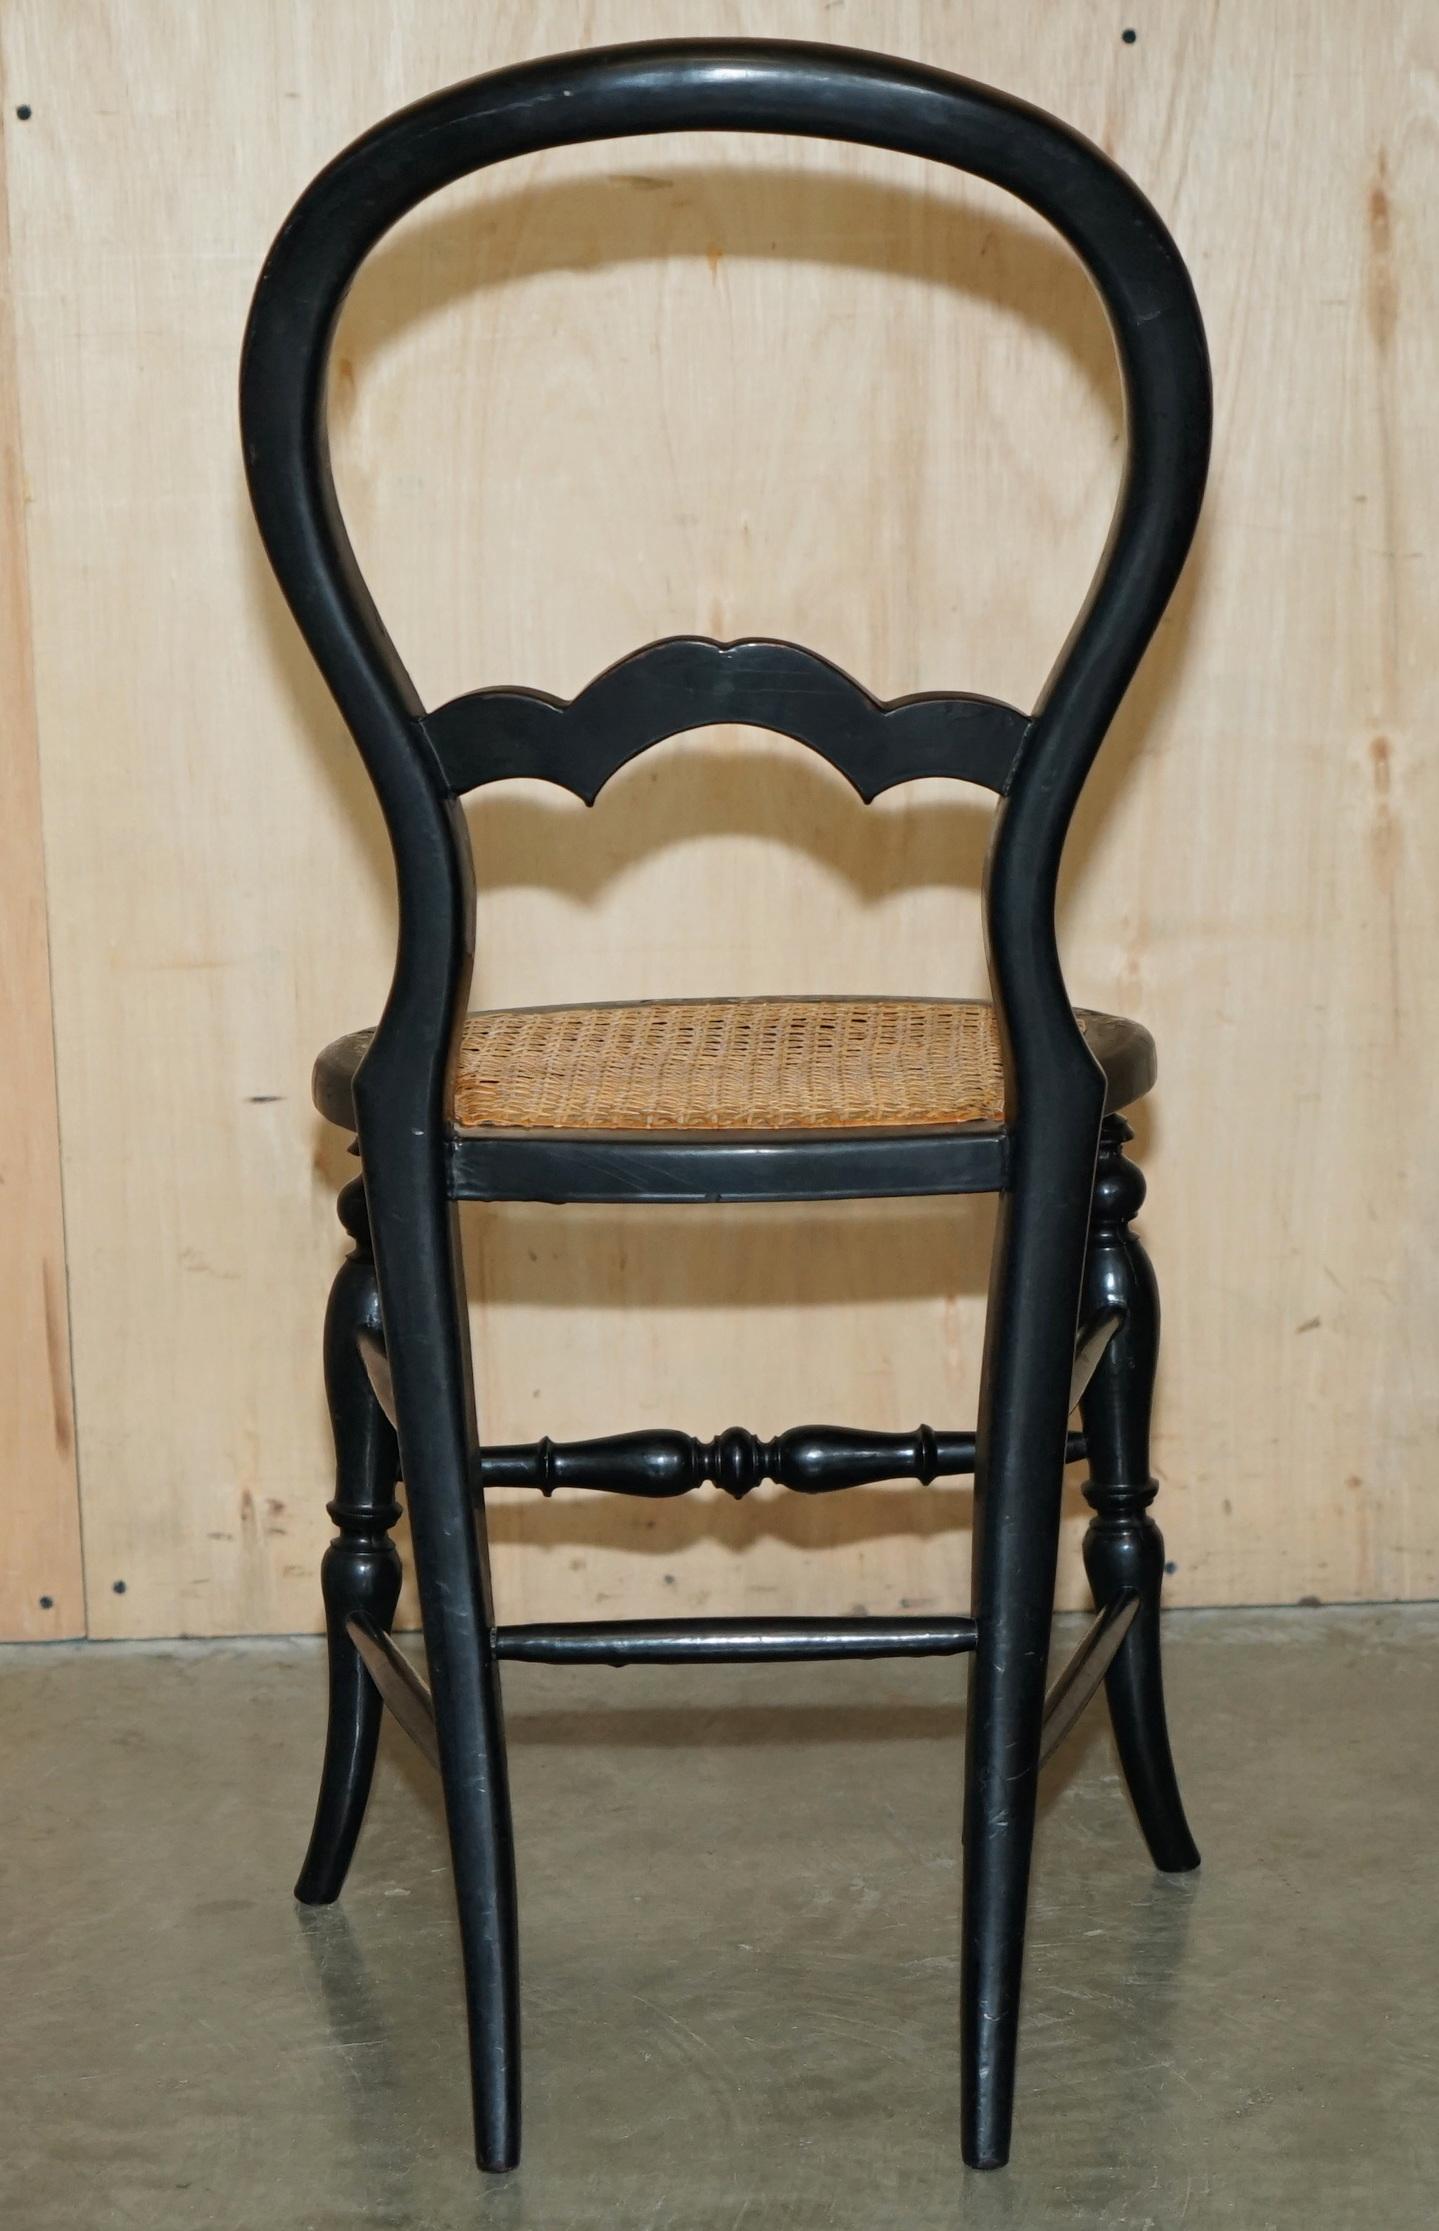 FOUR FINE AND ANTIQUE REGENCY BERGERE MOTHER OF PEARL EBONISED SIDE CHAIRs For Sale 6